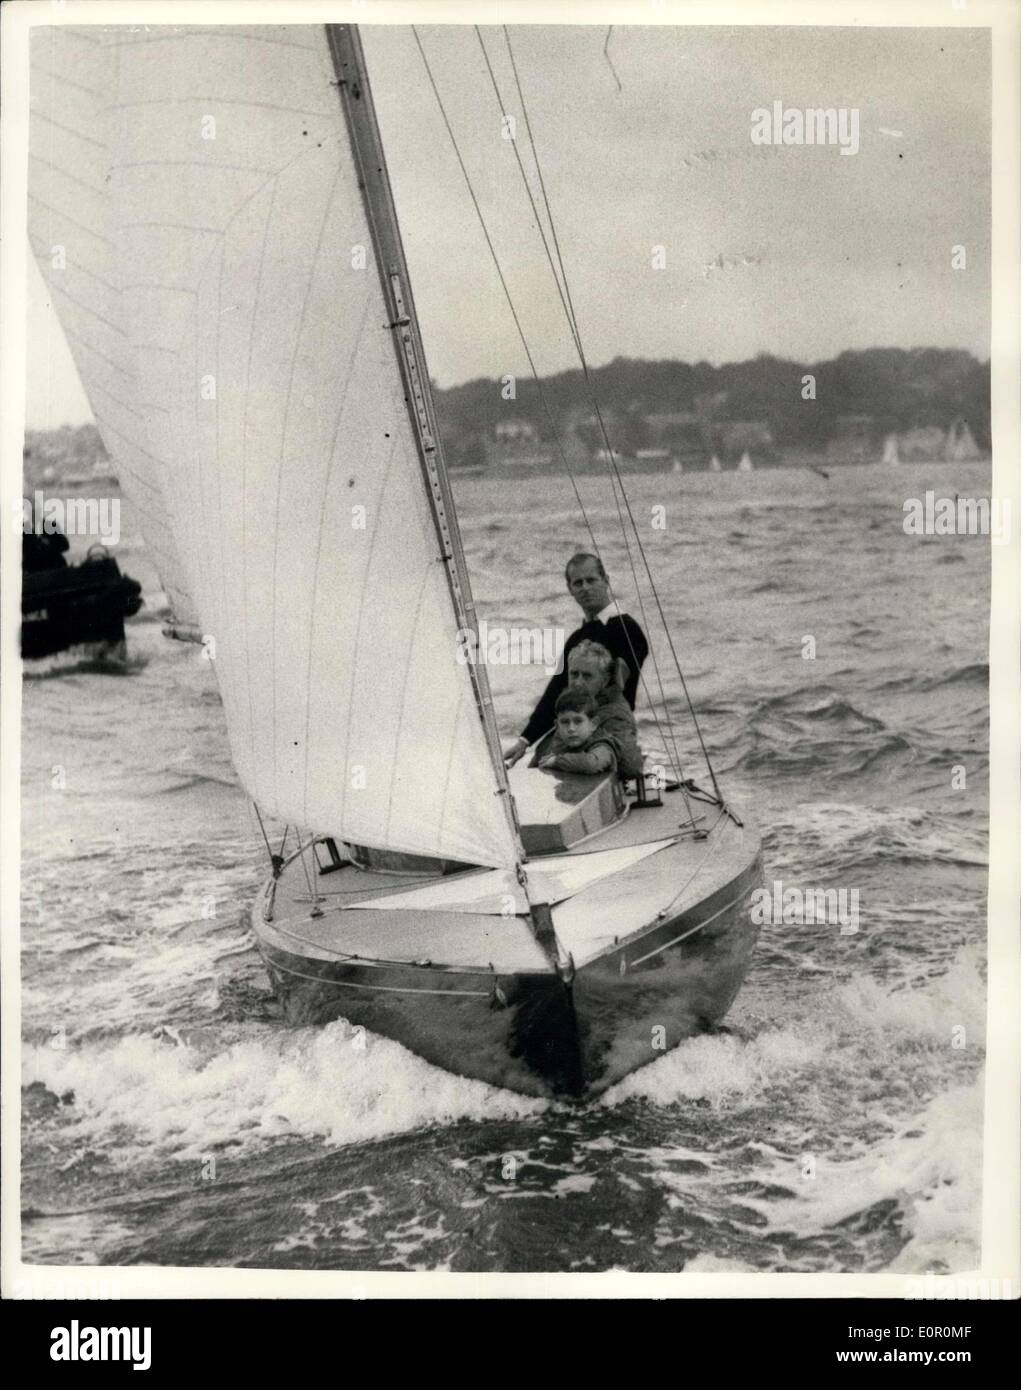 Aug. 06, 1957 - Prince Charles Goes Yacht Racing With His Father At Cowes.: Prince Charles accompanied his father. The Duke of Edinburgh, in the ''Bluebottle'', which is owned by the Duke and the Queen - when competing in a Dragon cless race, in the Cowes Regatta today. Photo shows Prince Charles seen with his father The Duke Of Edinburgh, and Mr. Uffa Fox, aboard the ''Bluebottle'' at Cowes today. Stock Photo